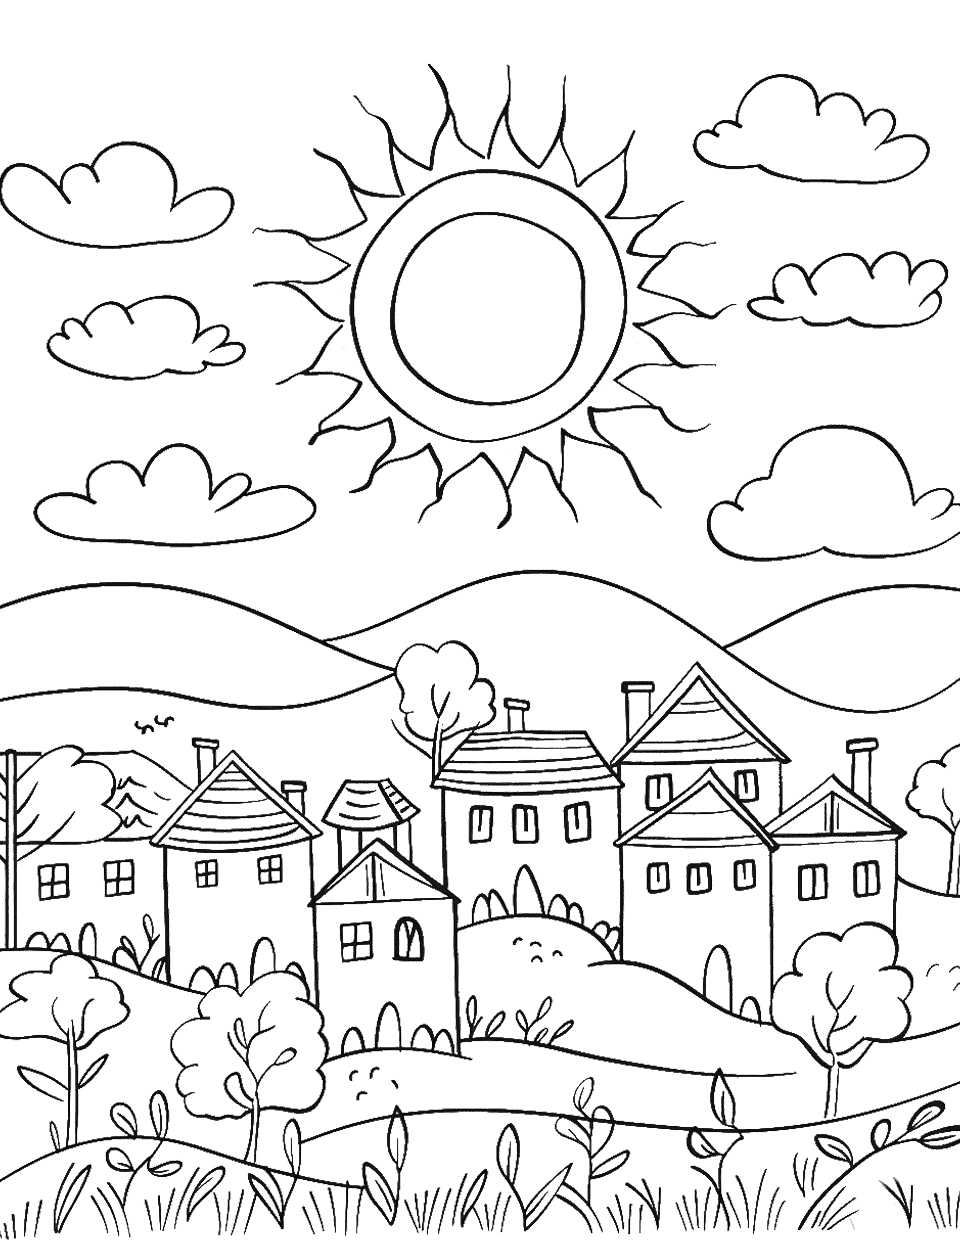 Sunny Morning in the Village Sun Coloring Page - A sun rising over a quiet village with houses and a few trees.